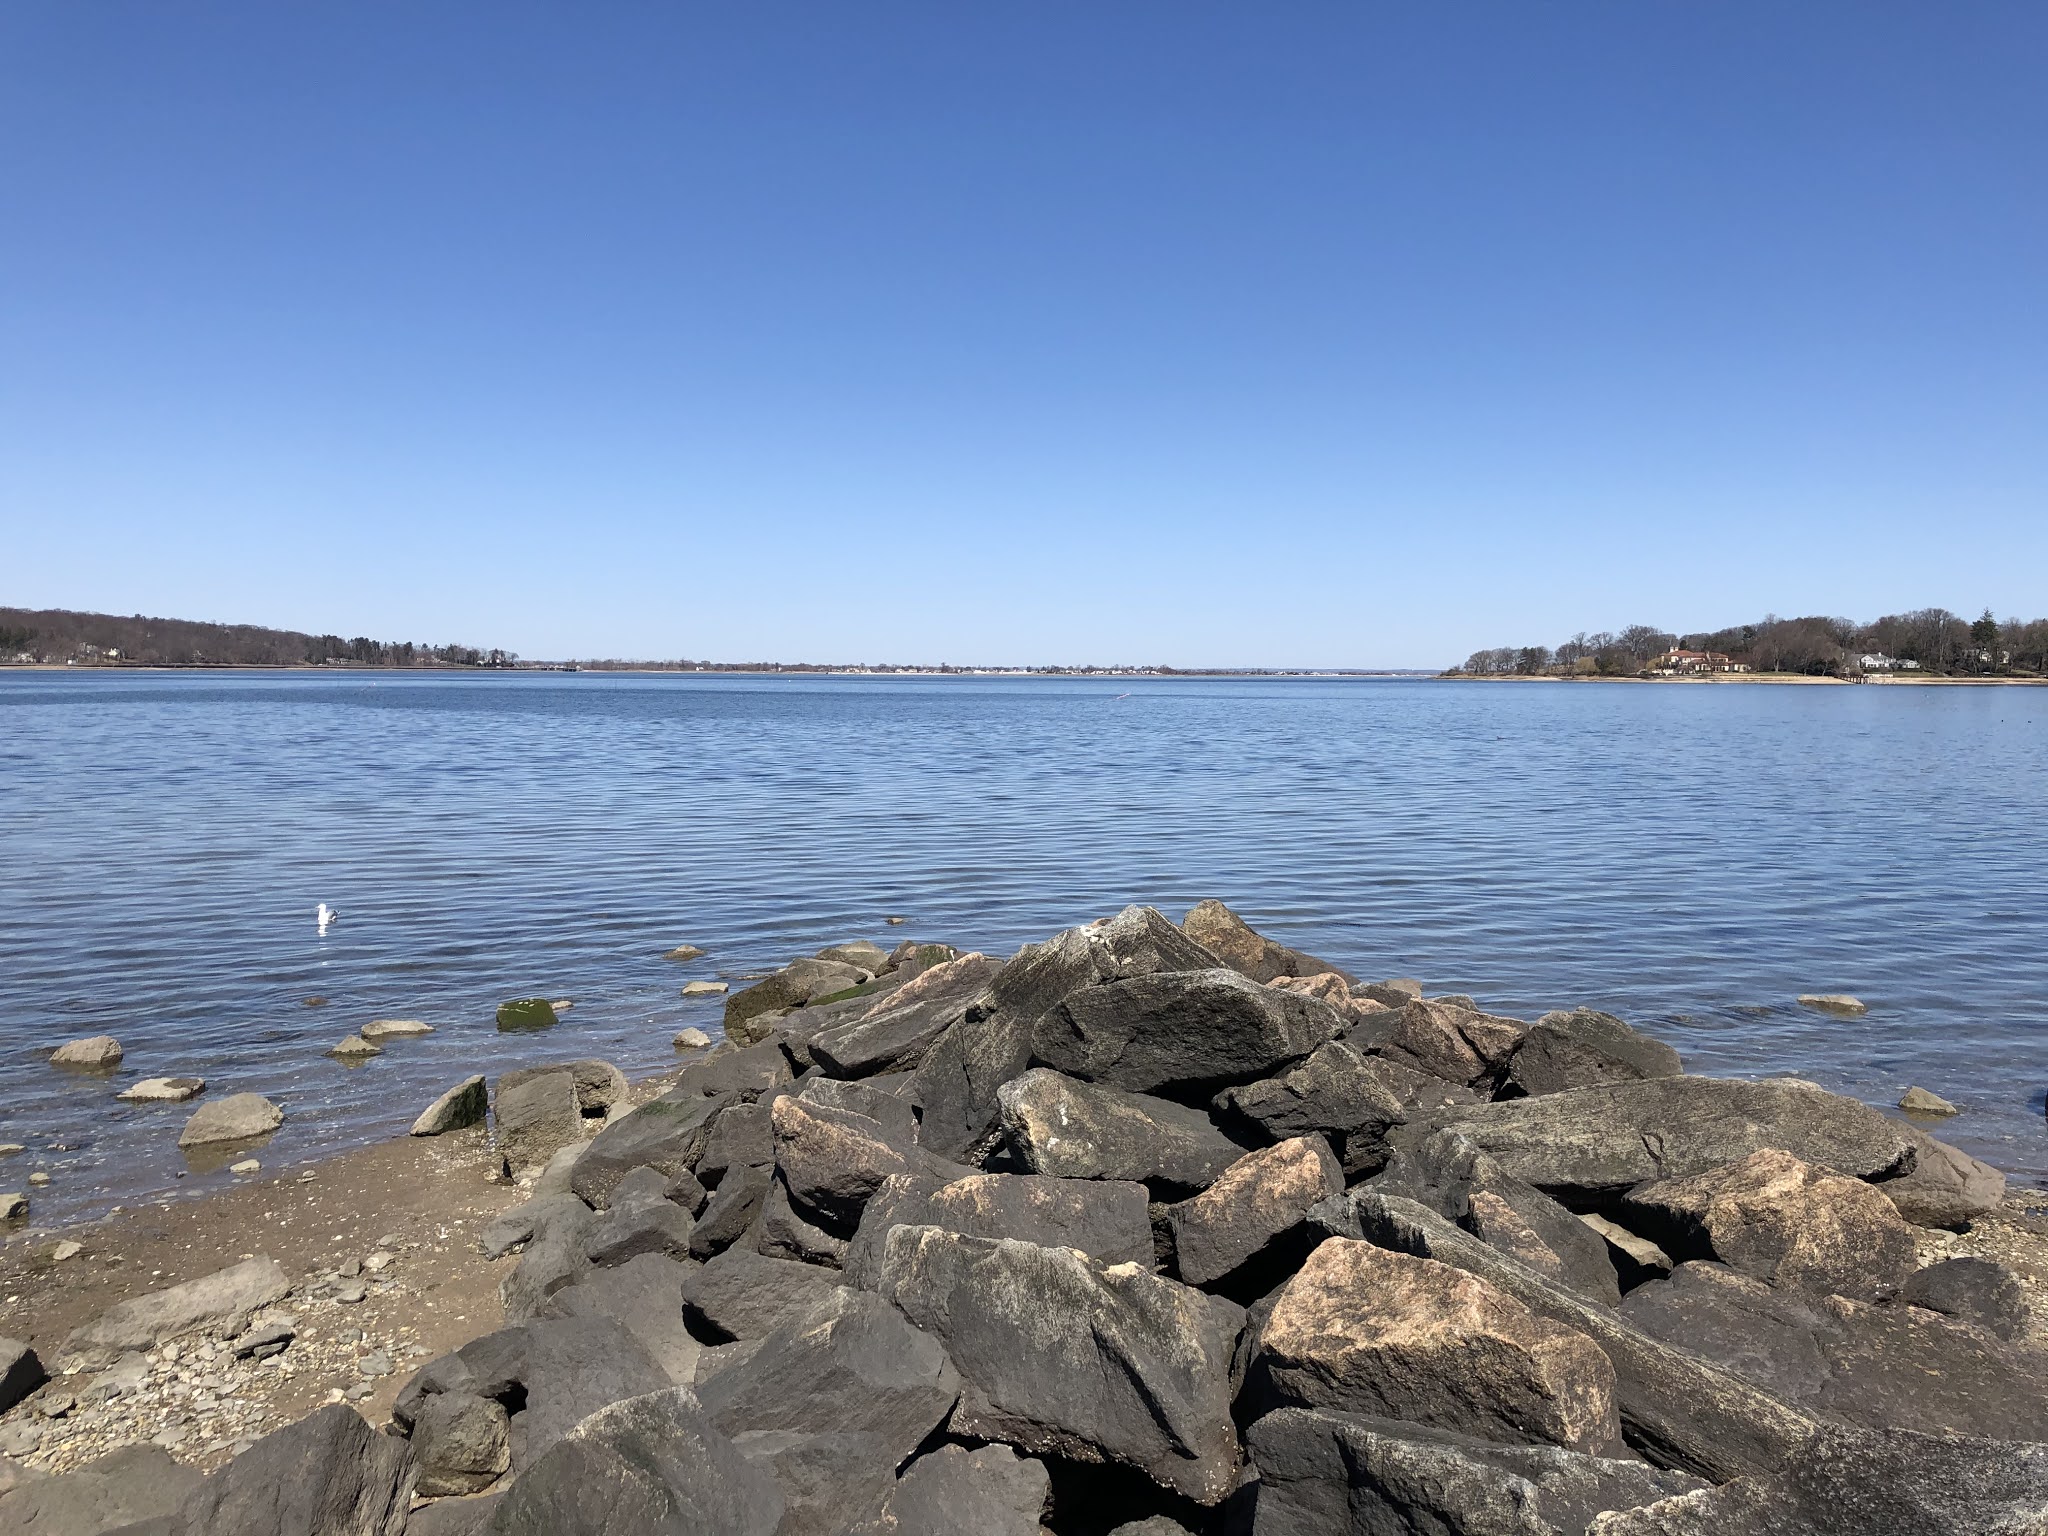 Top 3 things to do in Oyster Bay, Long Island, NY